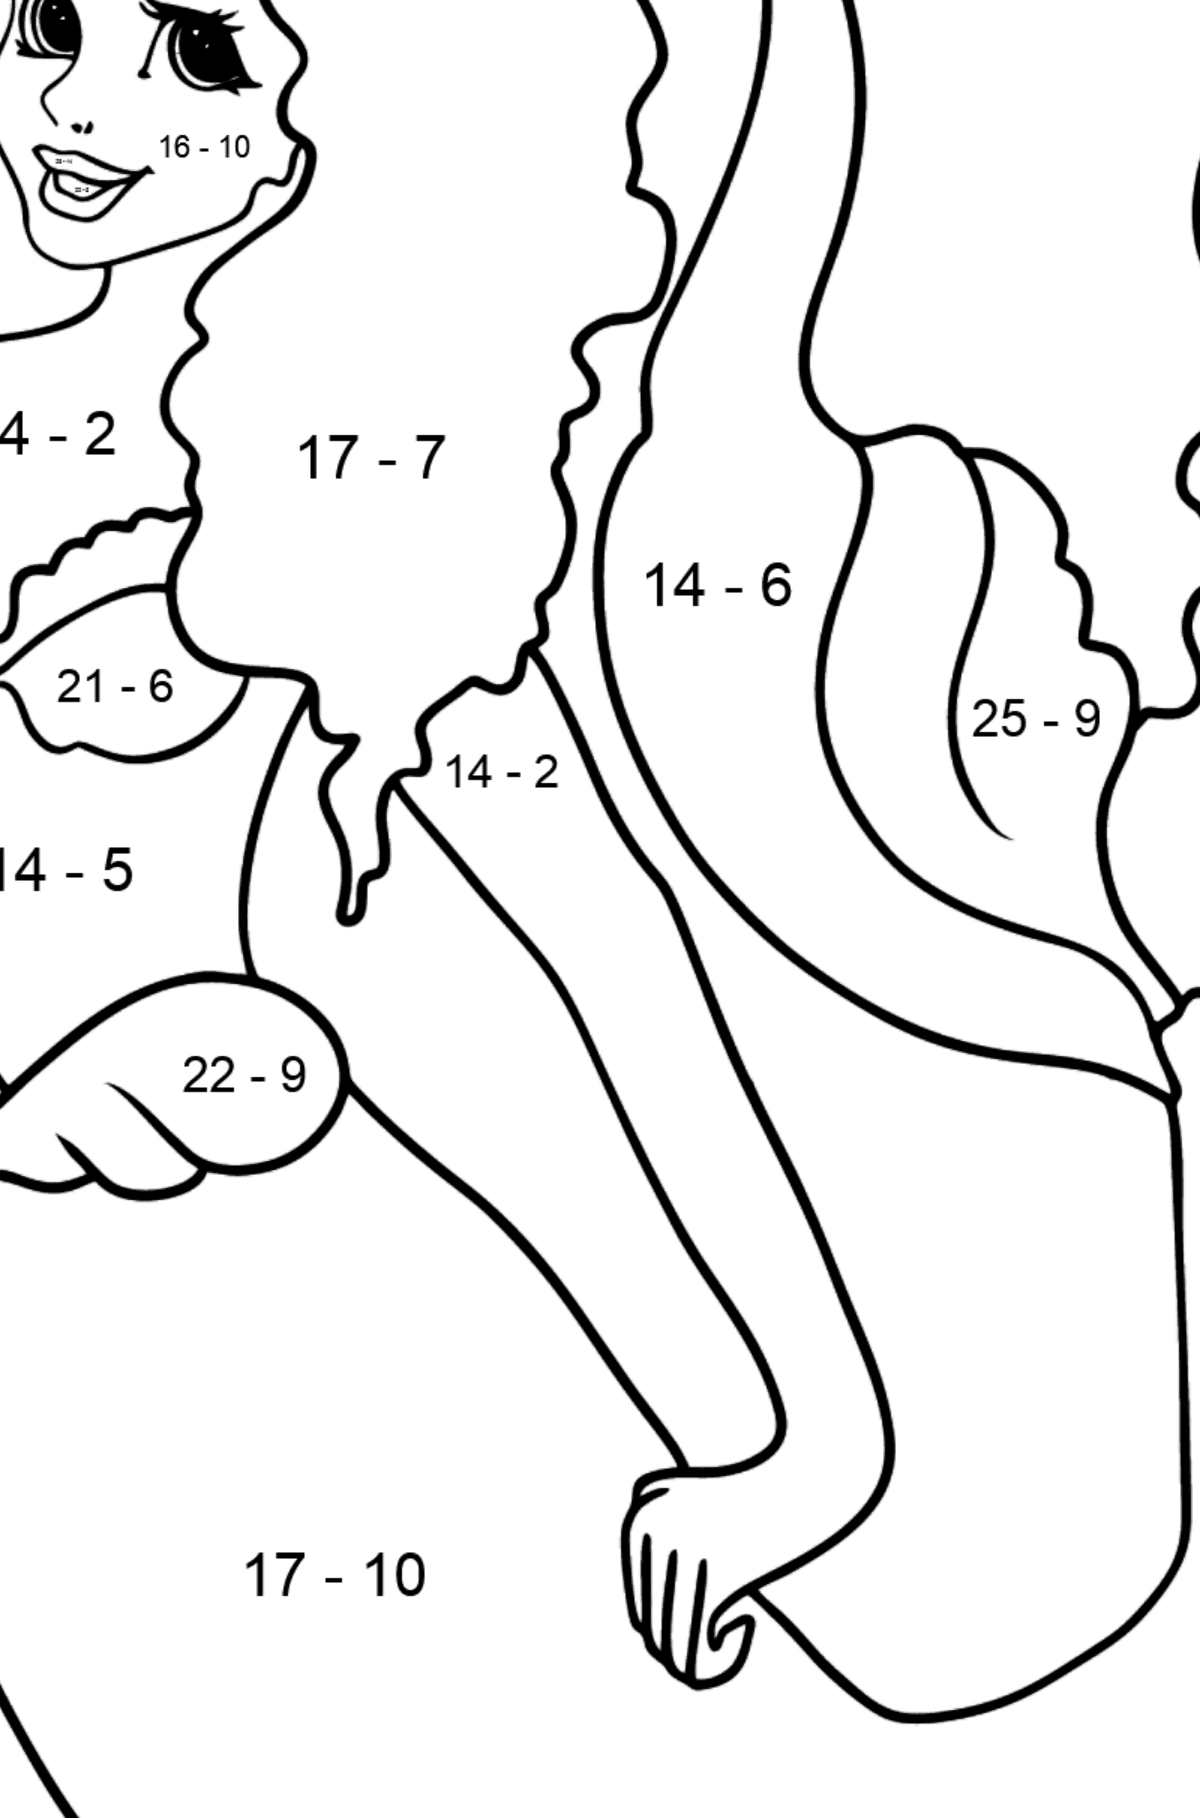 Coloring Page Mermaid with green tail - Math Coloring - Subtraction for Kids